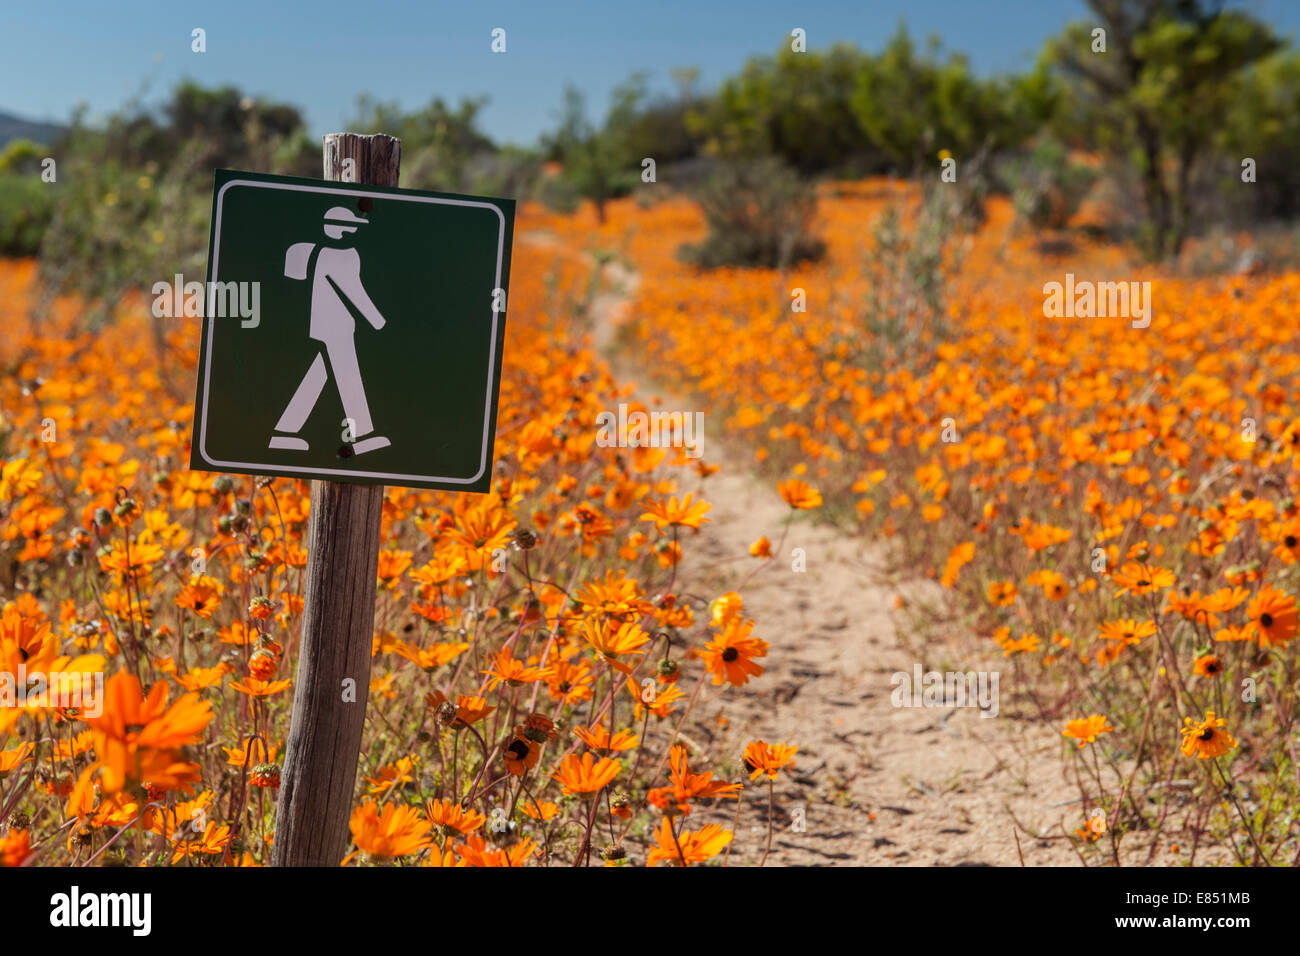 The Korhaan walking trail through fields of wild flowers in the Namaqua National Park in South Africa. Stock Photo